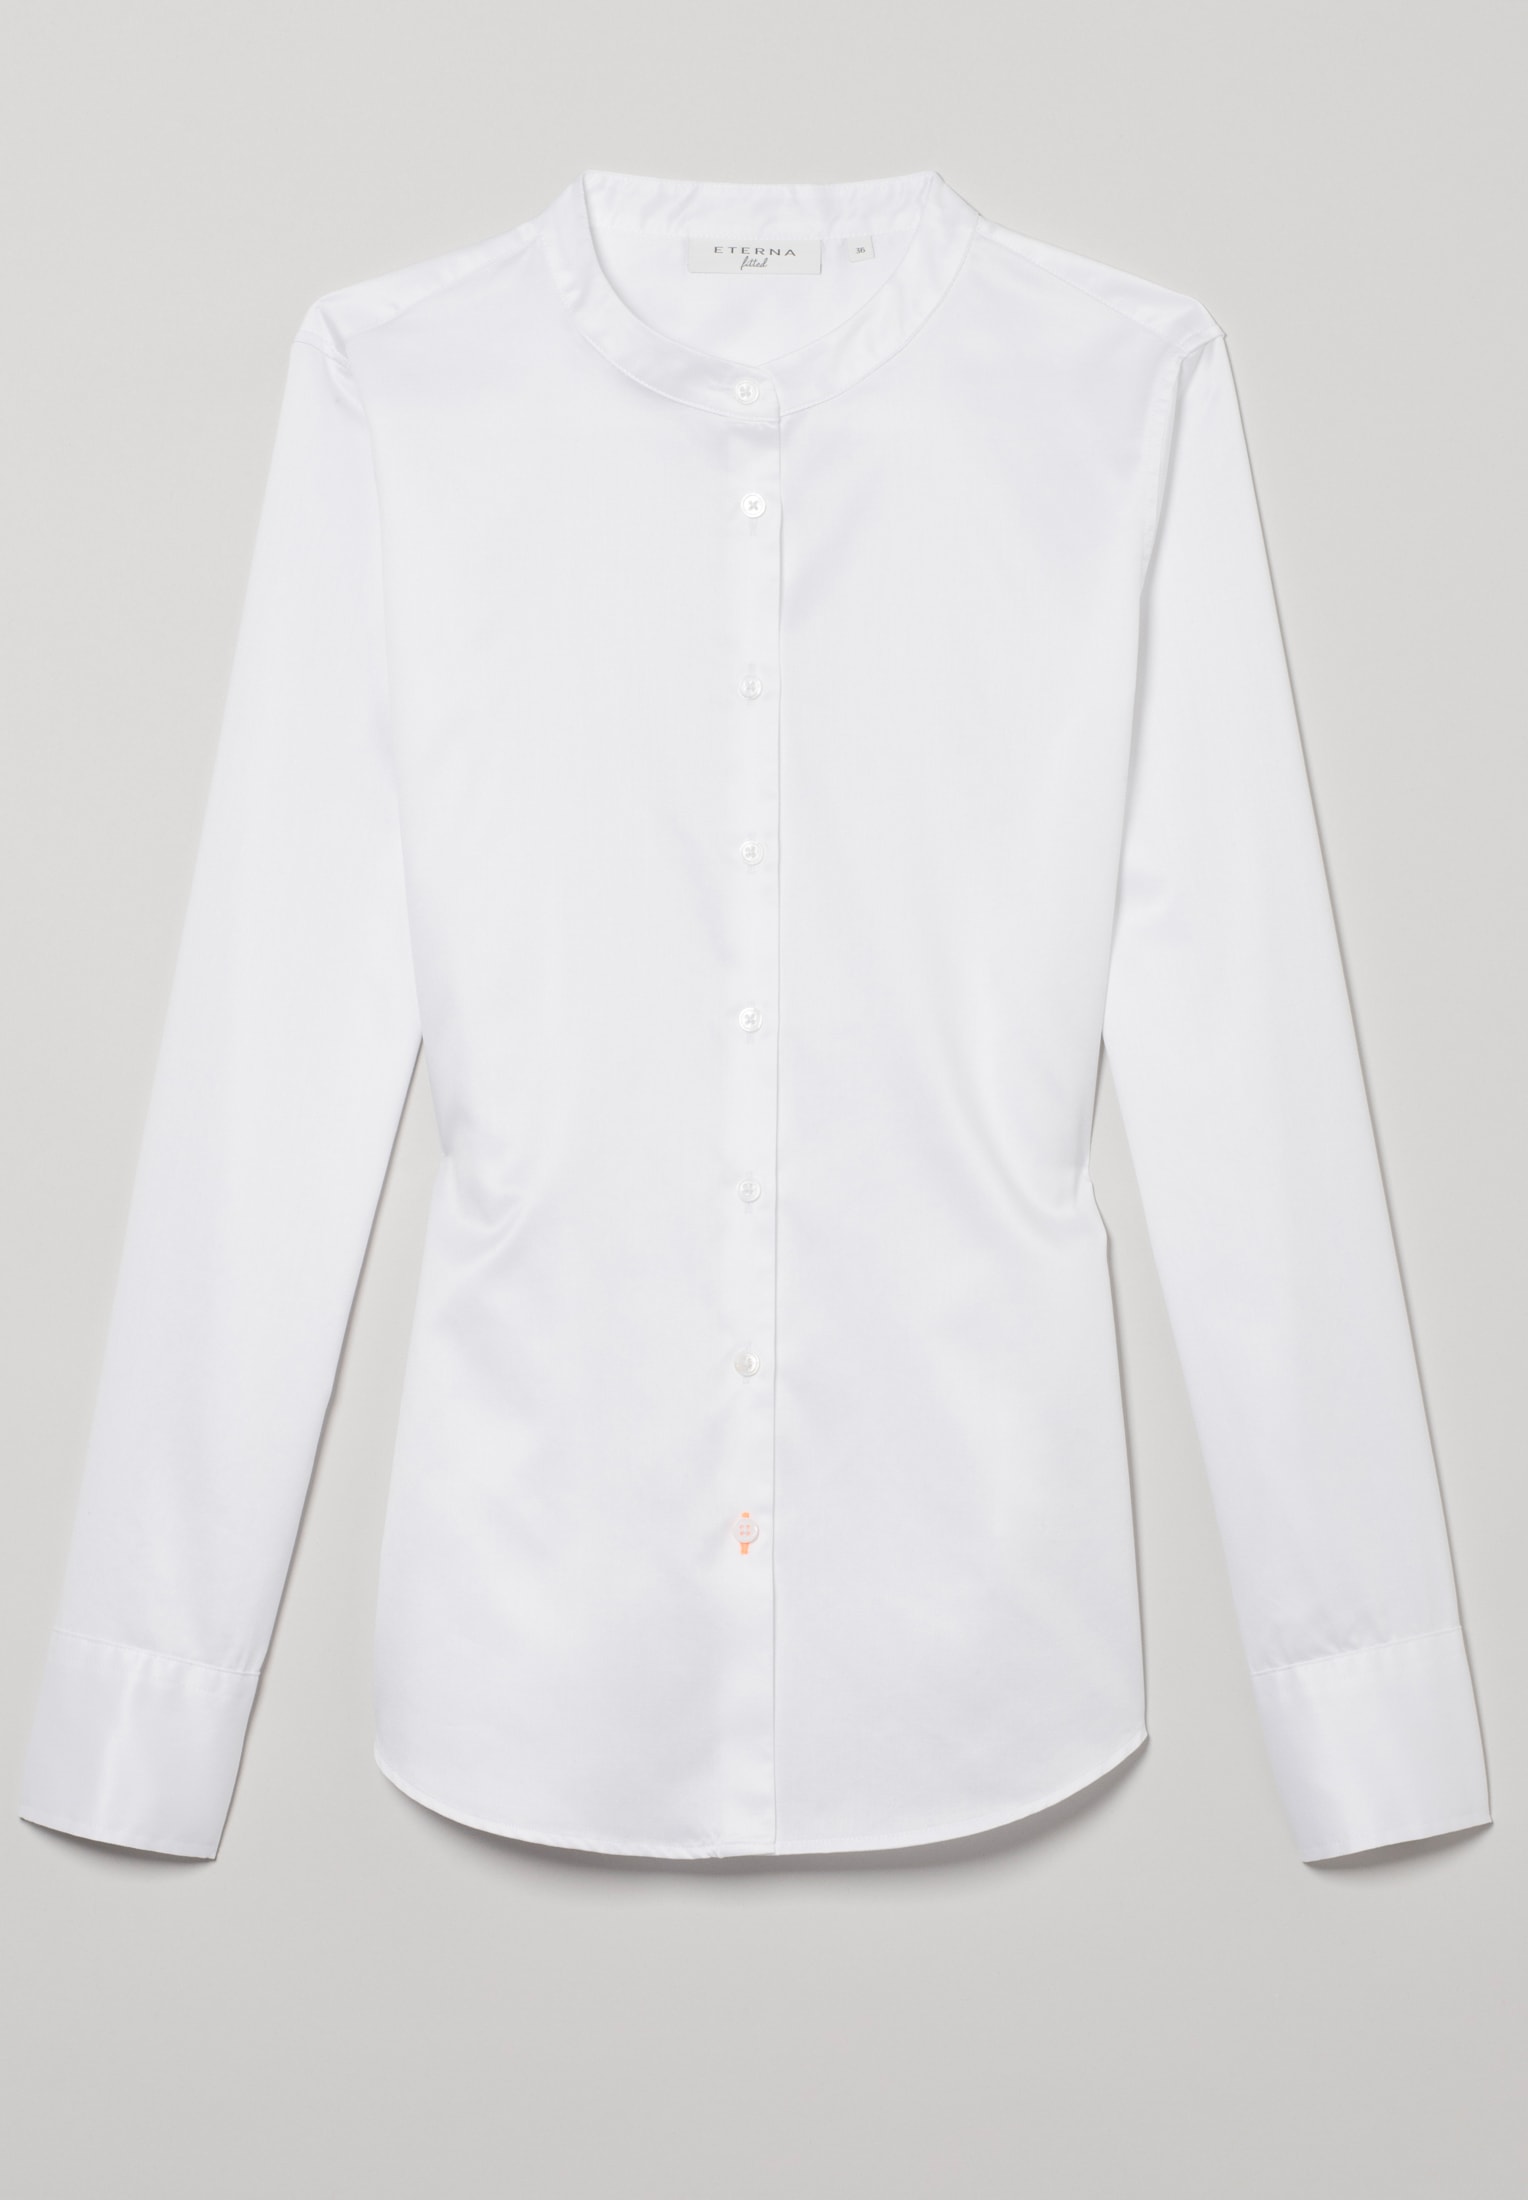 Soft Luxury Shirt Bluse in off-white unifarben | off-white | 38 | Langarm |  2BL03742-00-02-38-1/1